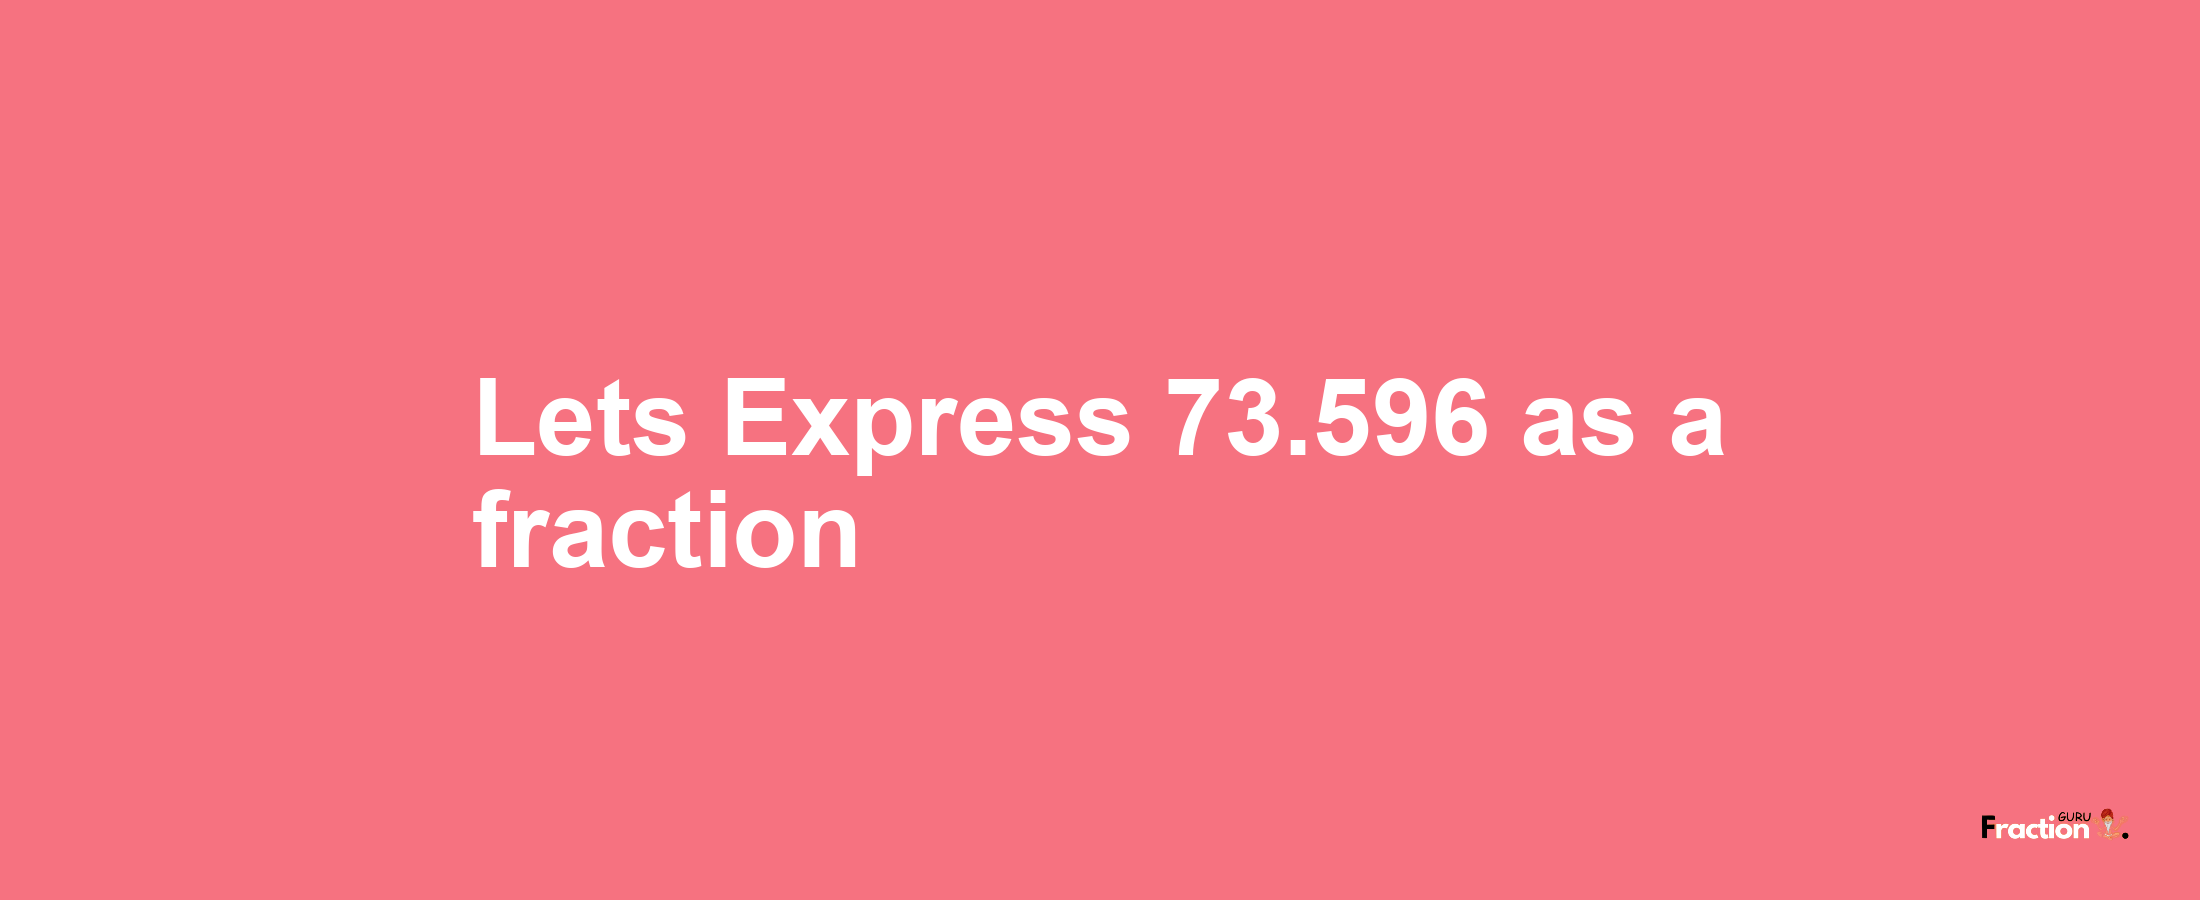 Lets Express 73.596 as afraction